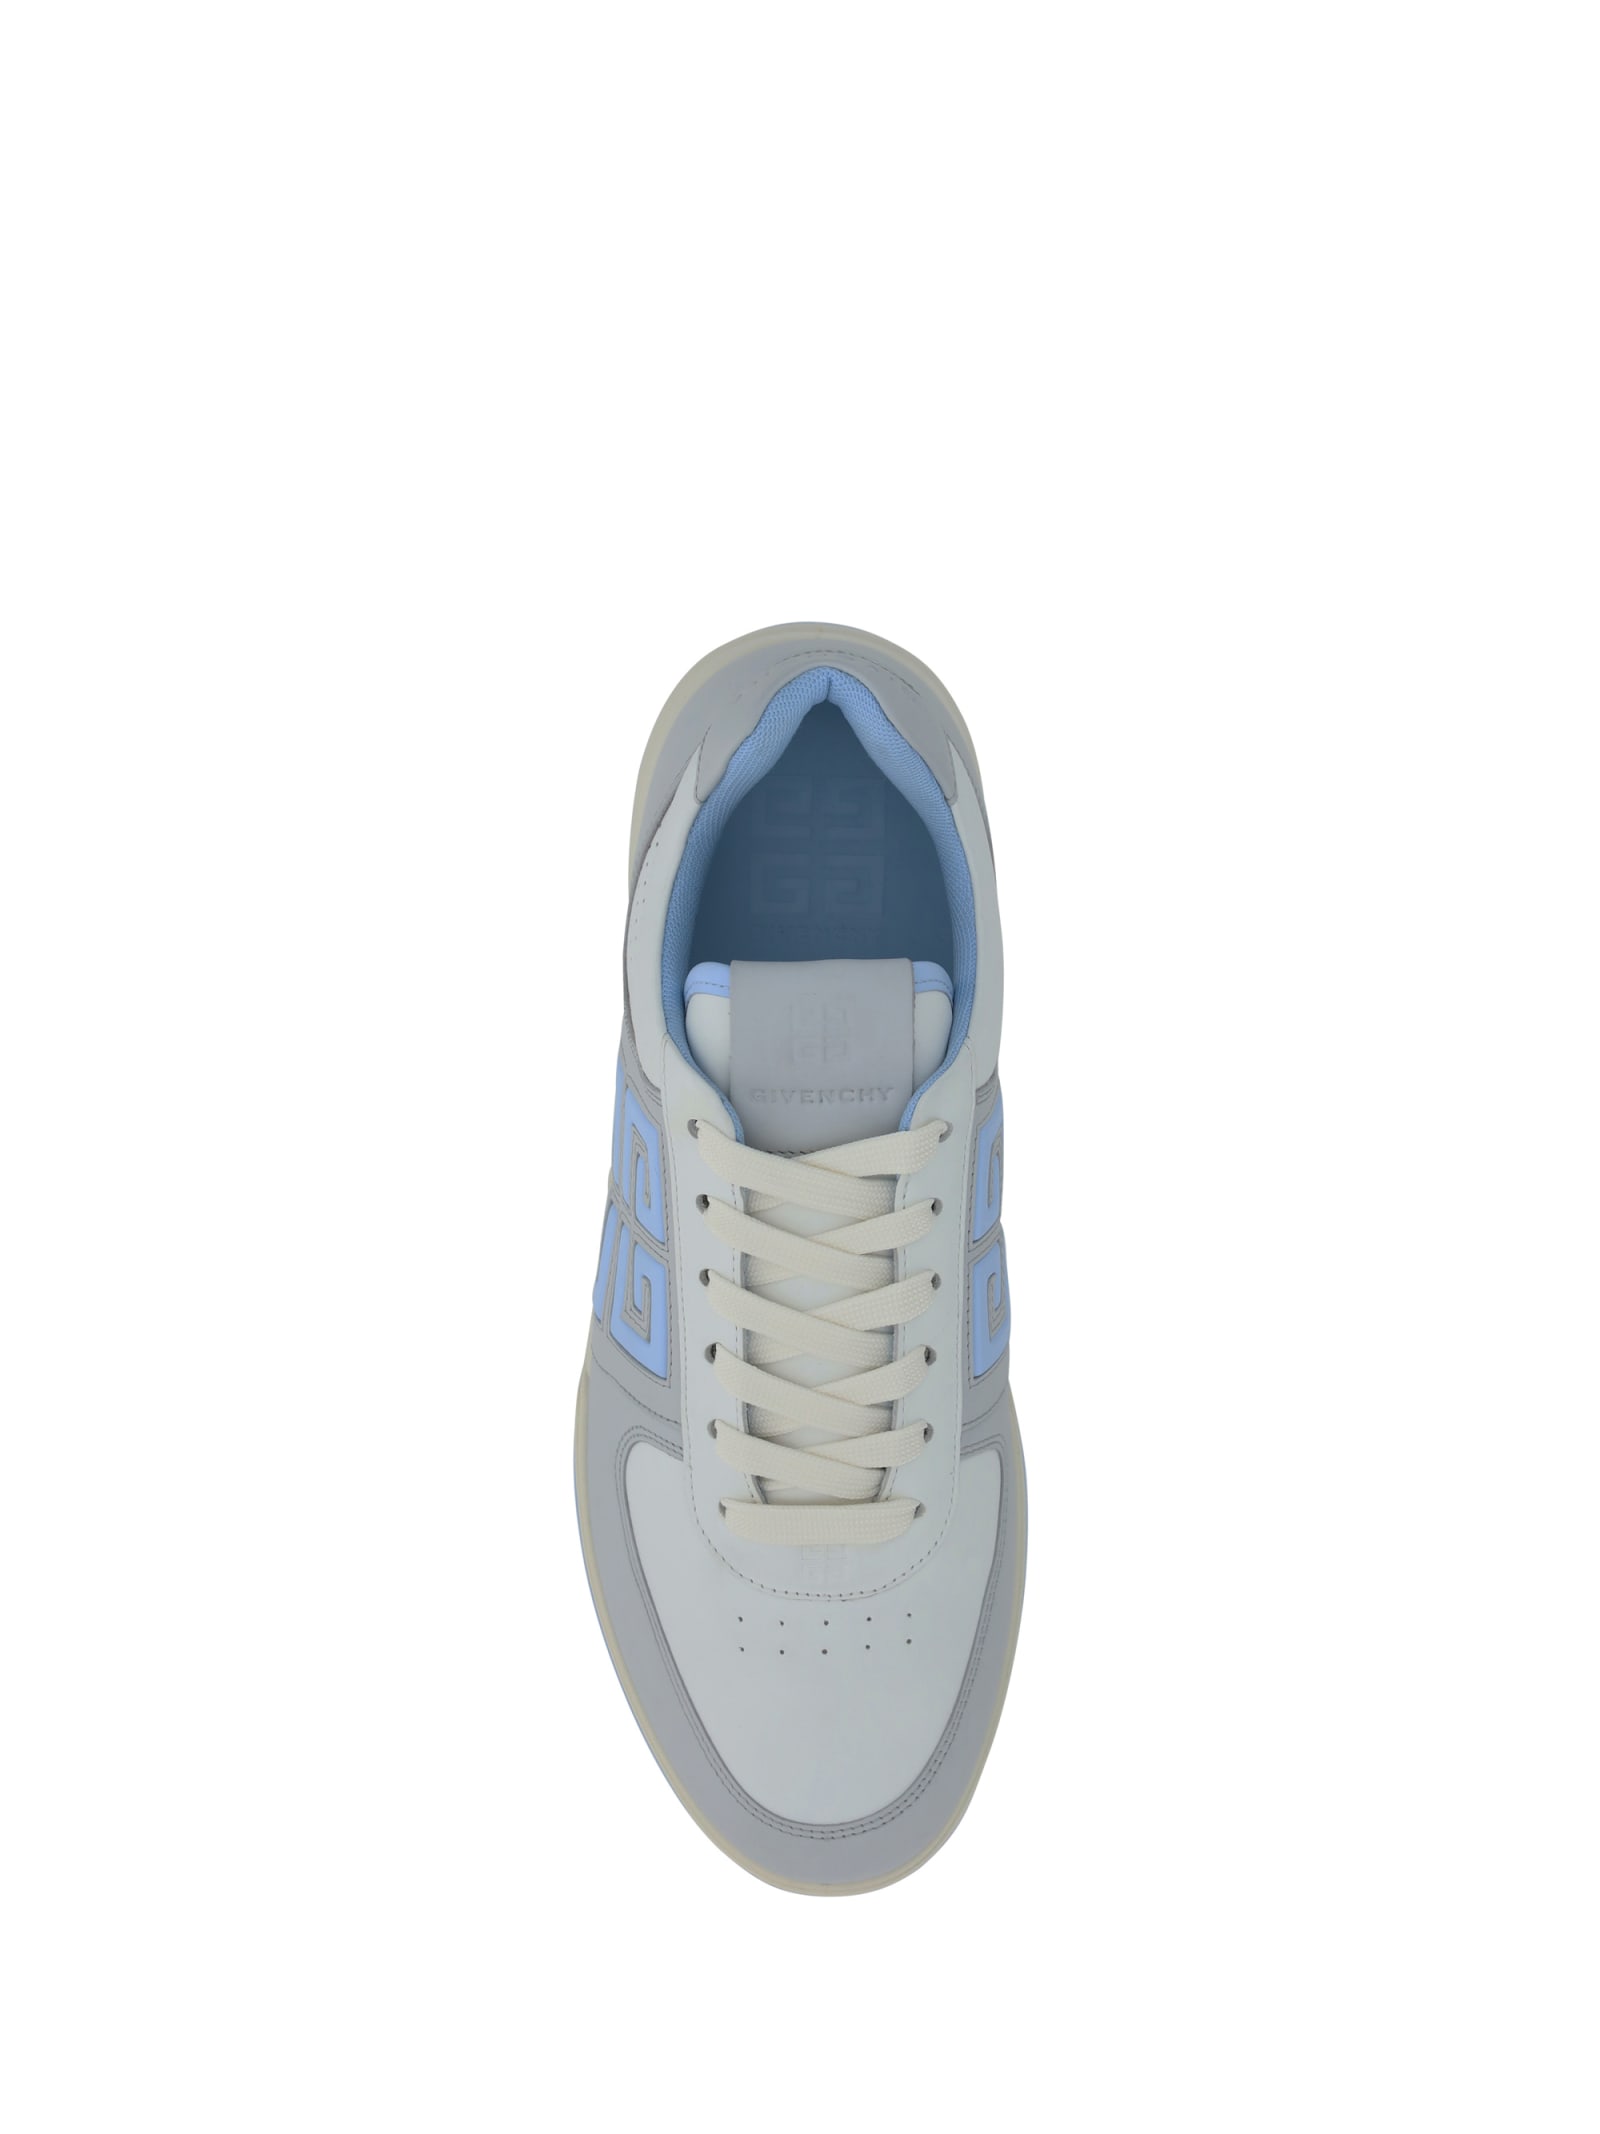 Shop Givenchy G4 Low Top Sneakers In Grey/blue